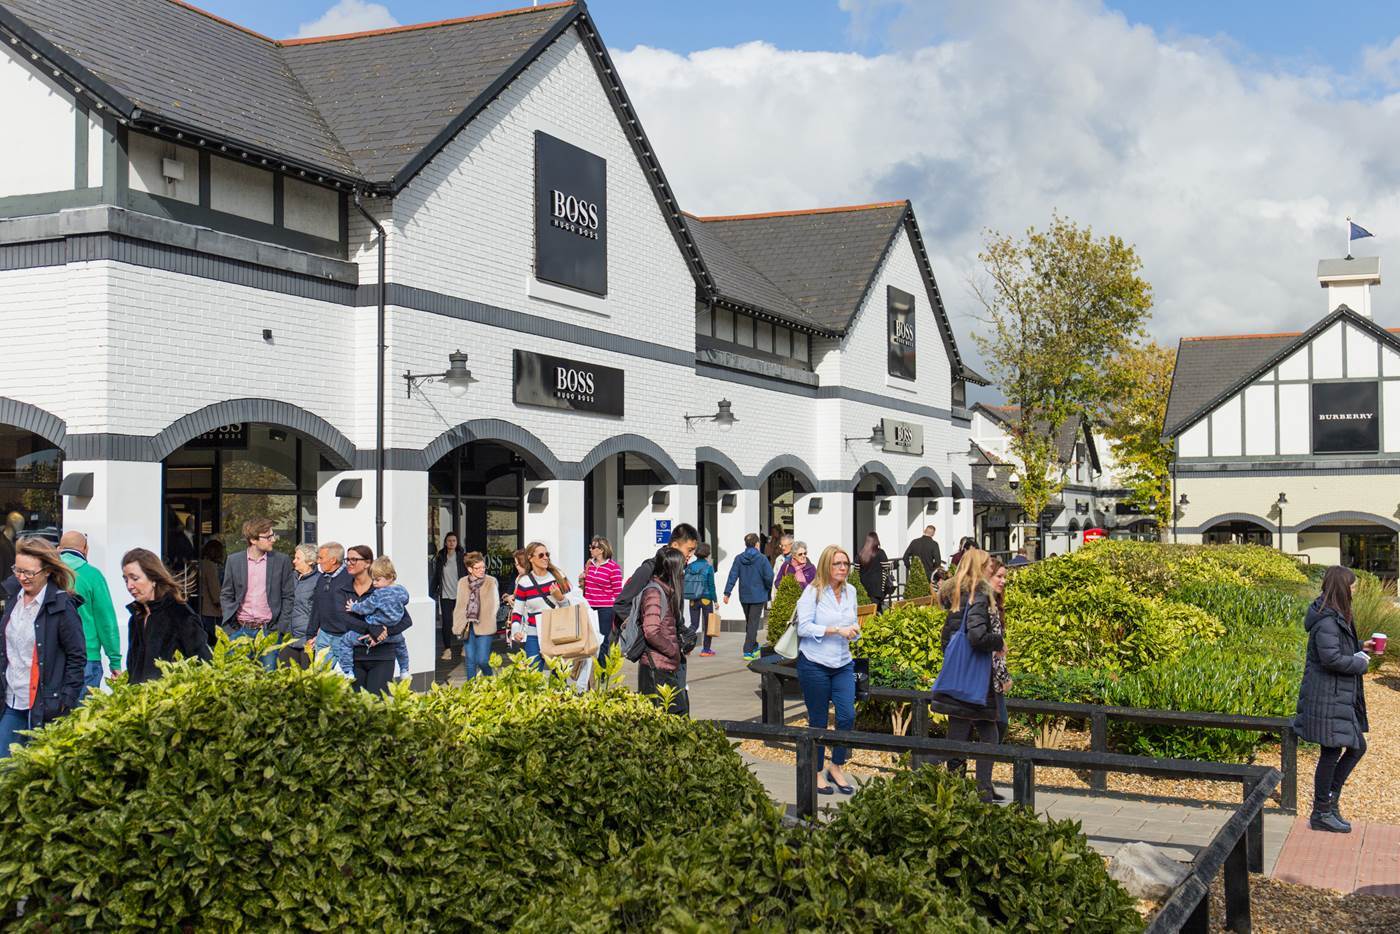 Rental fashion By Rotation will be coming to McArthurGlen Designer Outlet Cheshire Oaks this month with a pop-up store.